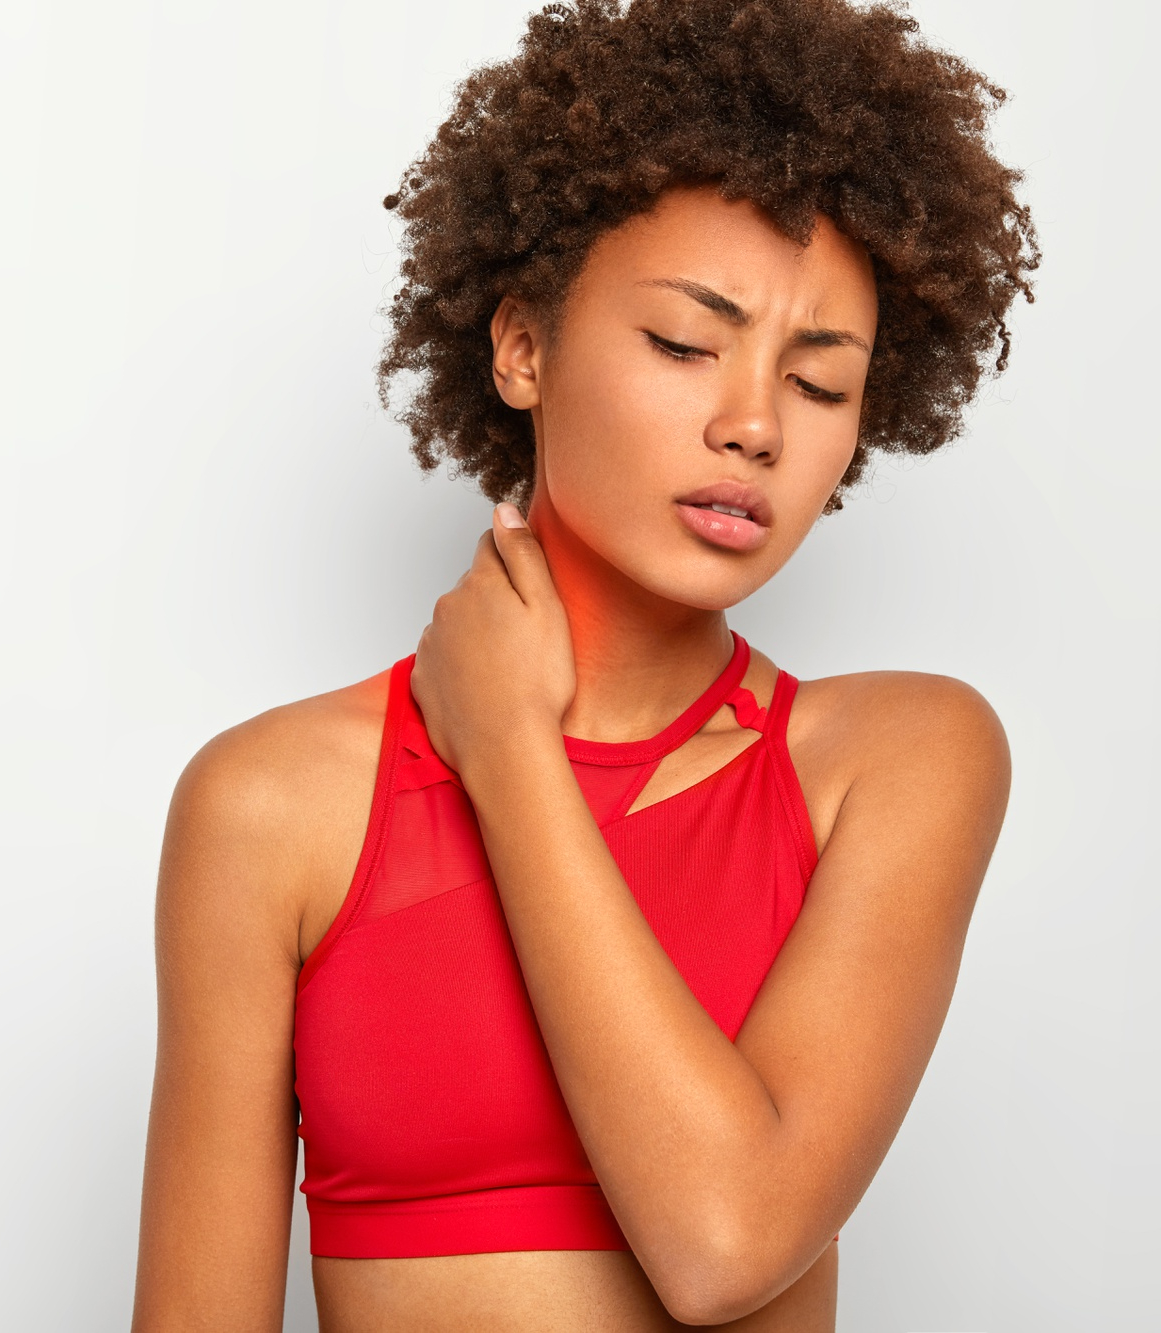 tired-curly-young-woman-touches-neck-keeps-eyes-closed-wears-red-top-tilts-head-being-exhausted-poses-agaist-white-backround-your-promotional-content.png